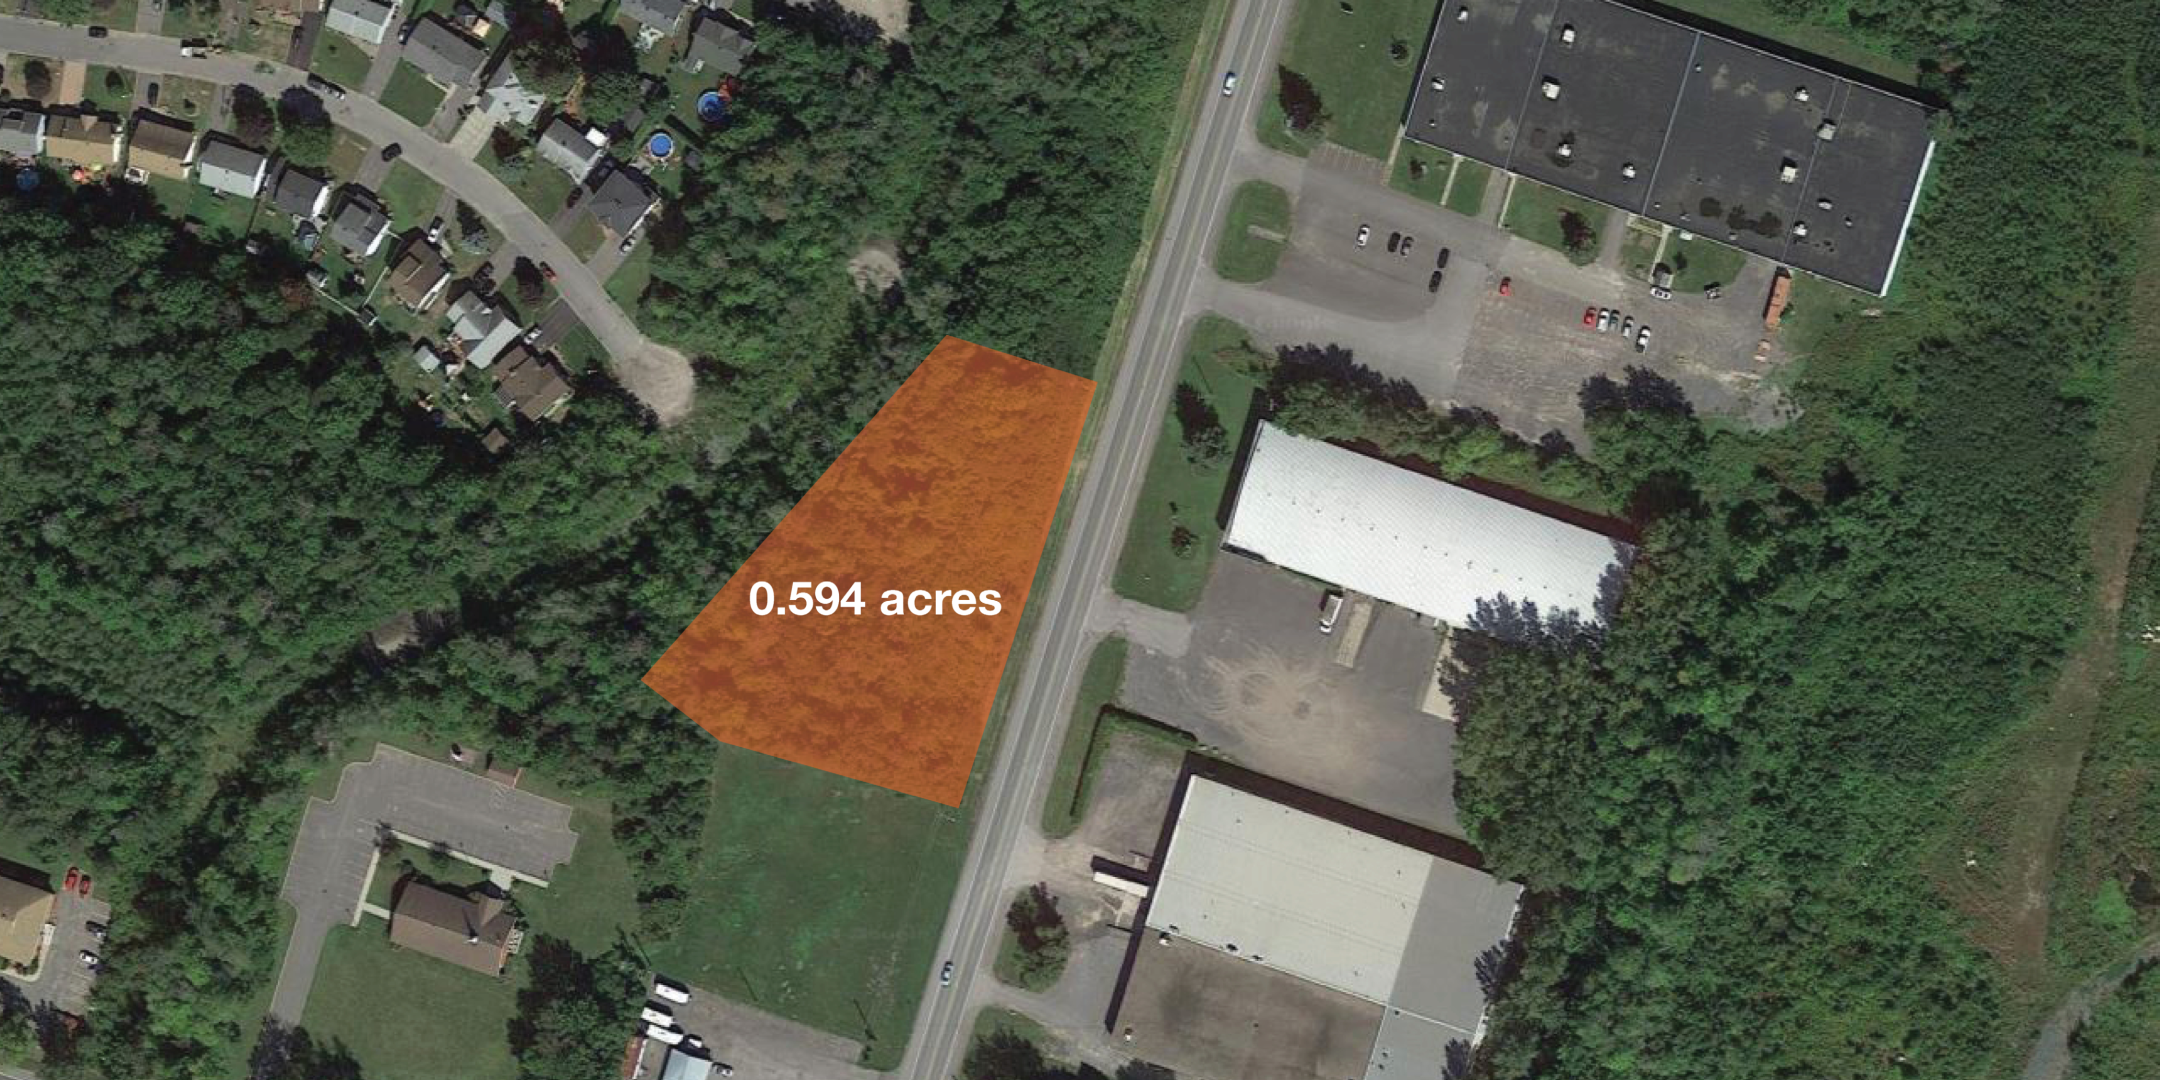 Aerial view of 0.594 acres on Cameron Street